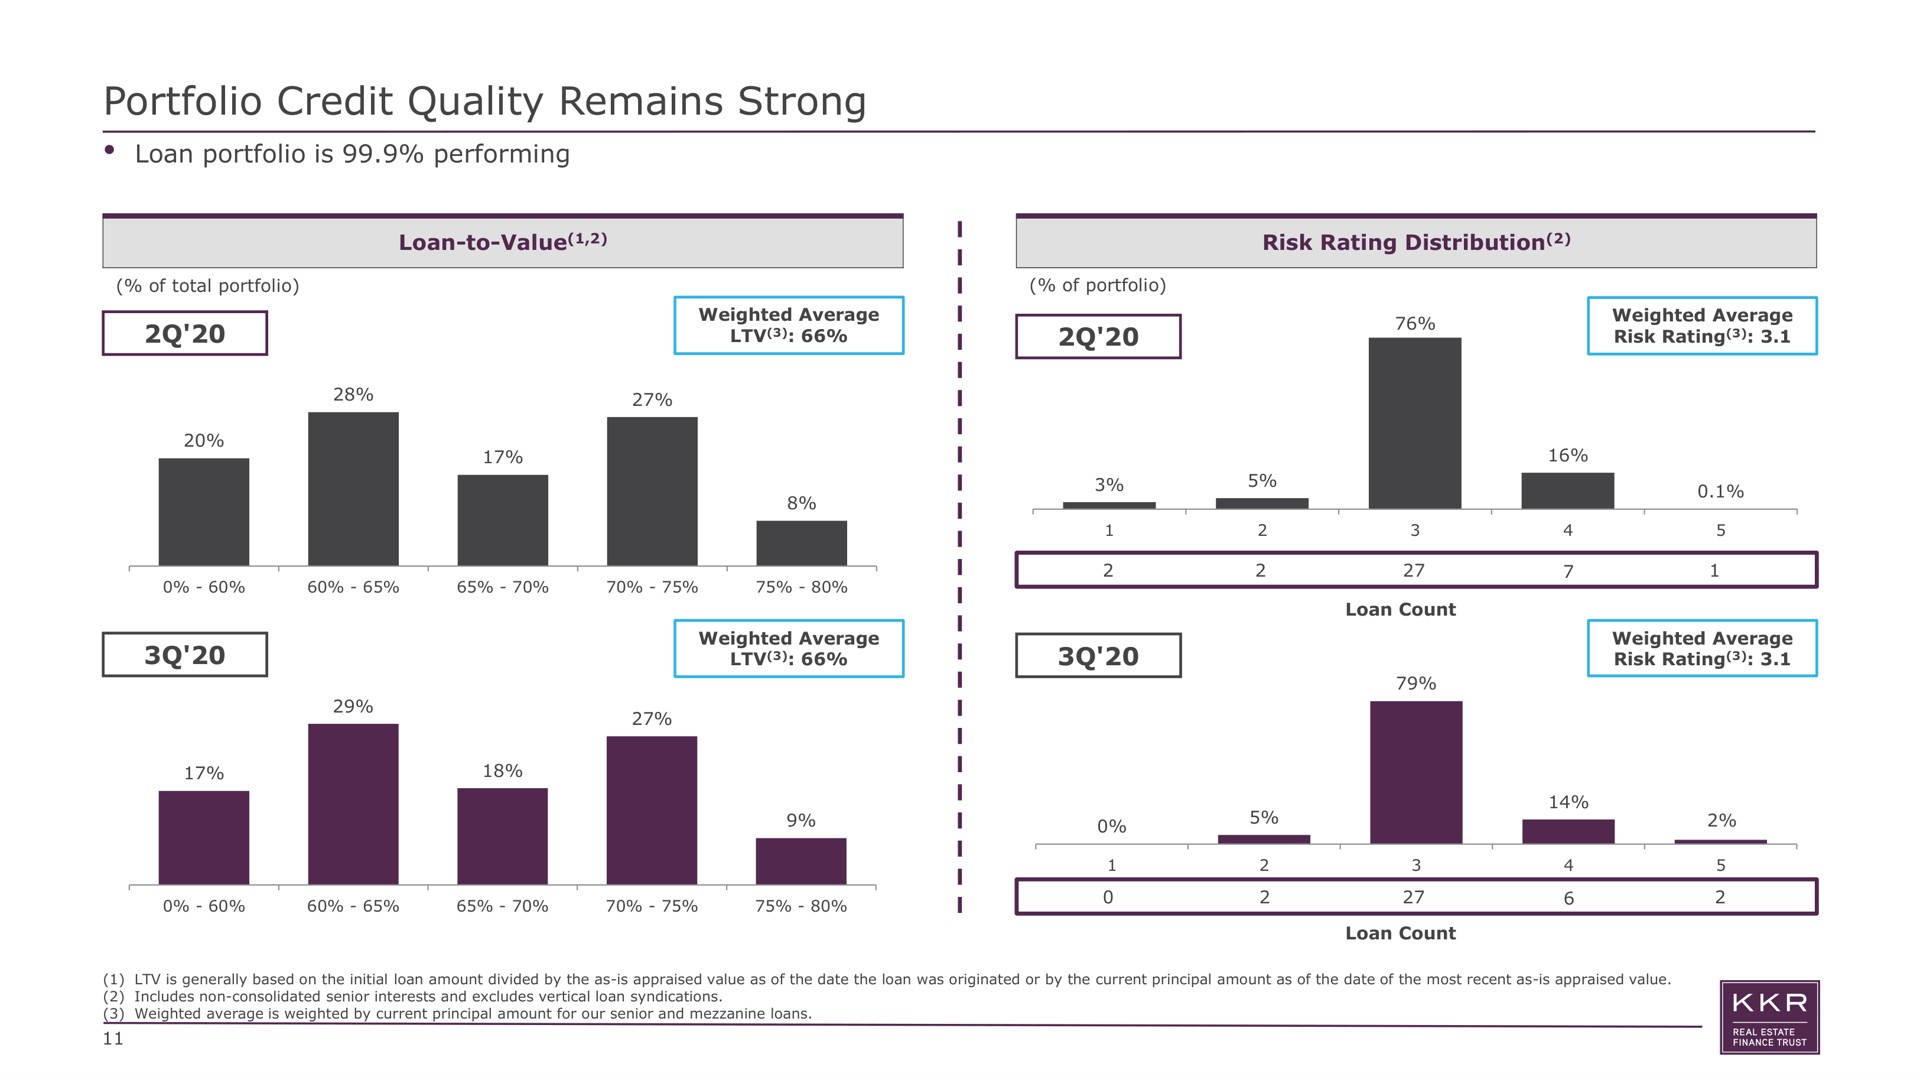 portfolio credit quality remains strong loan is performing loan to value risk rating distribution | KKR Real Estate Finance Trust